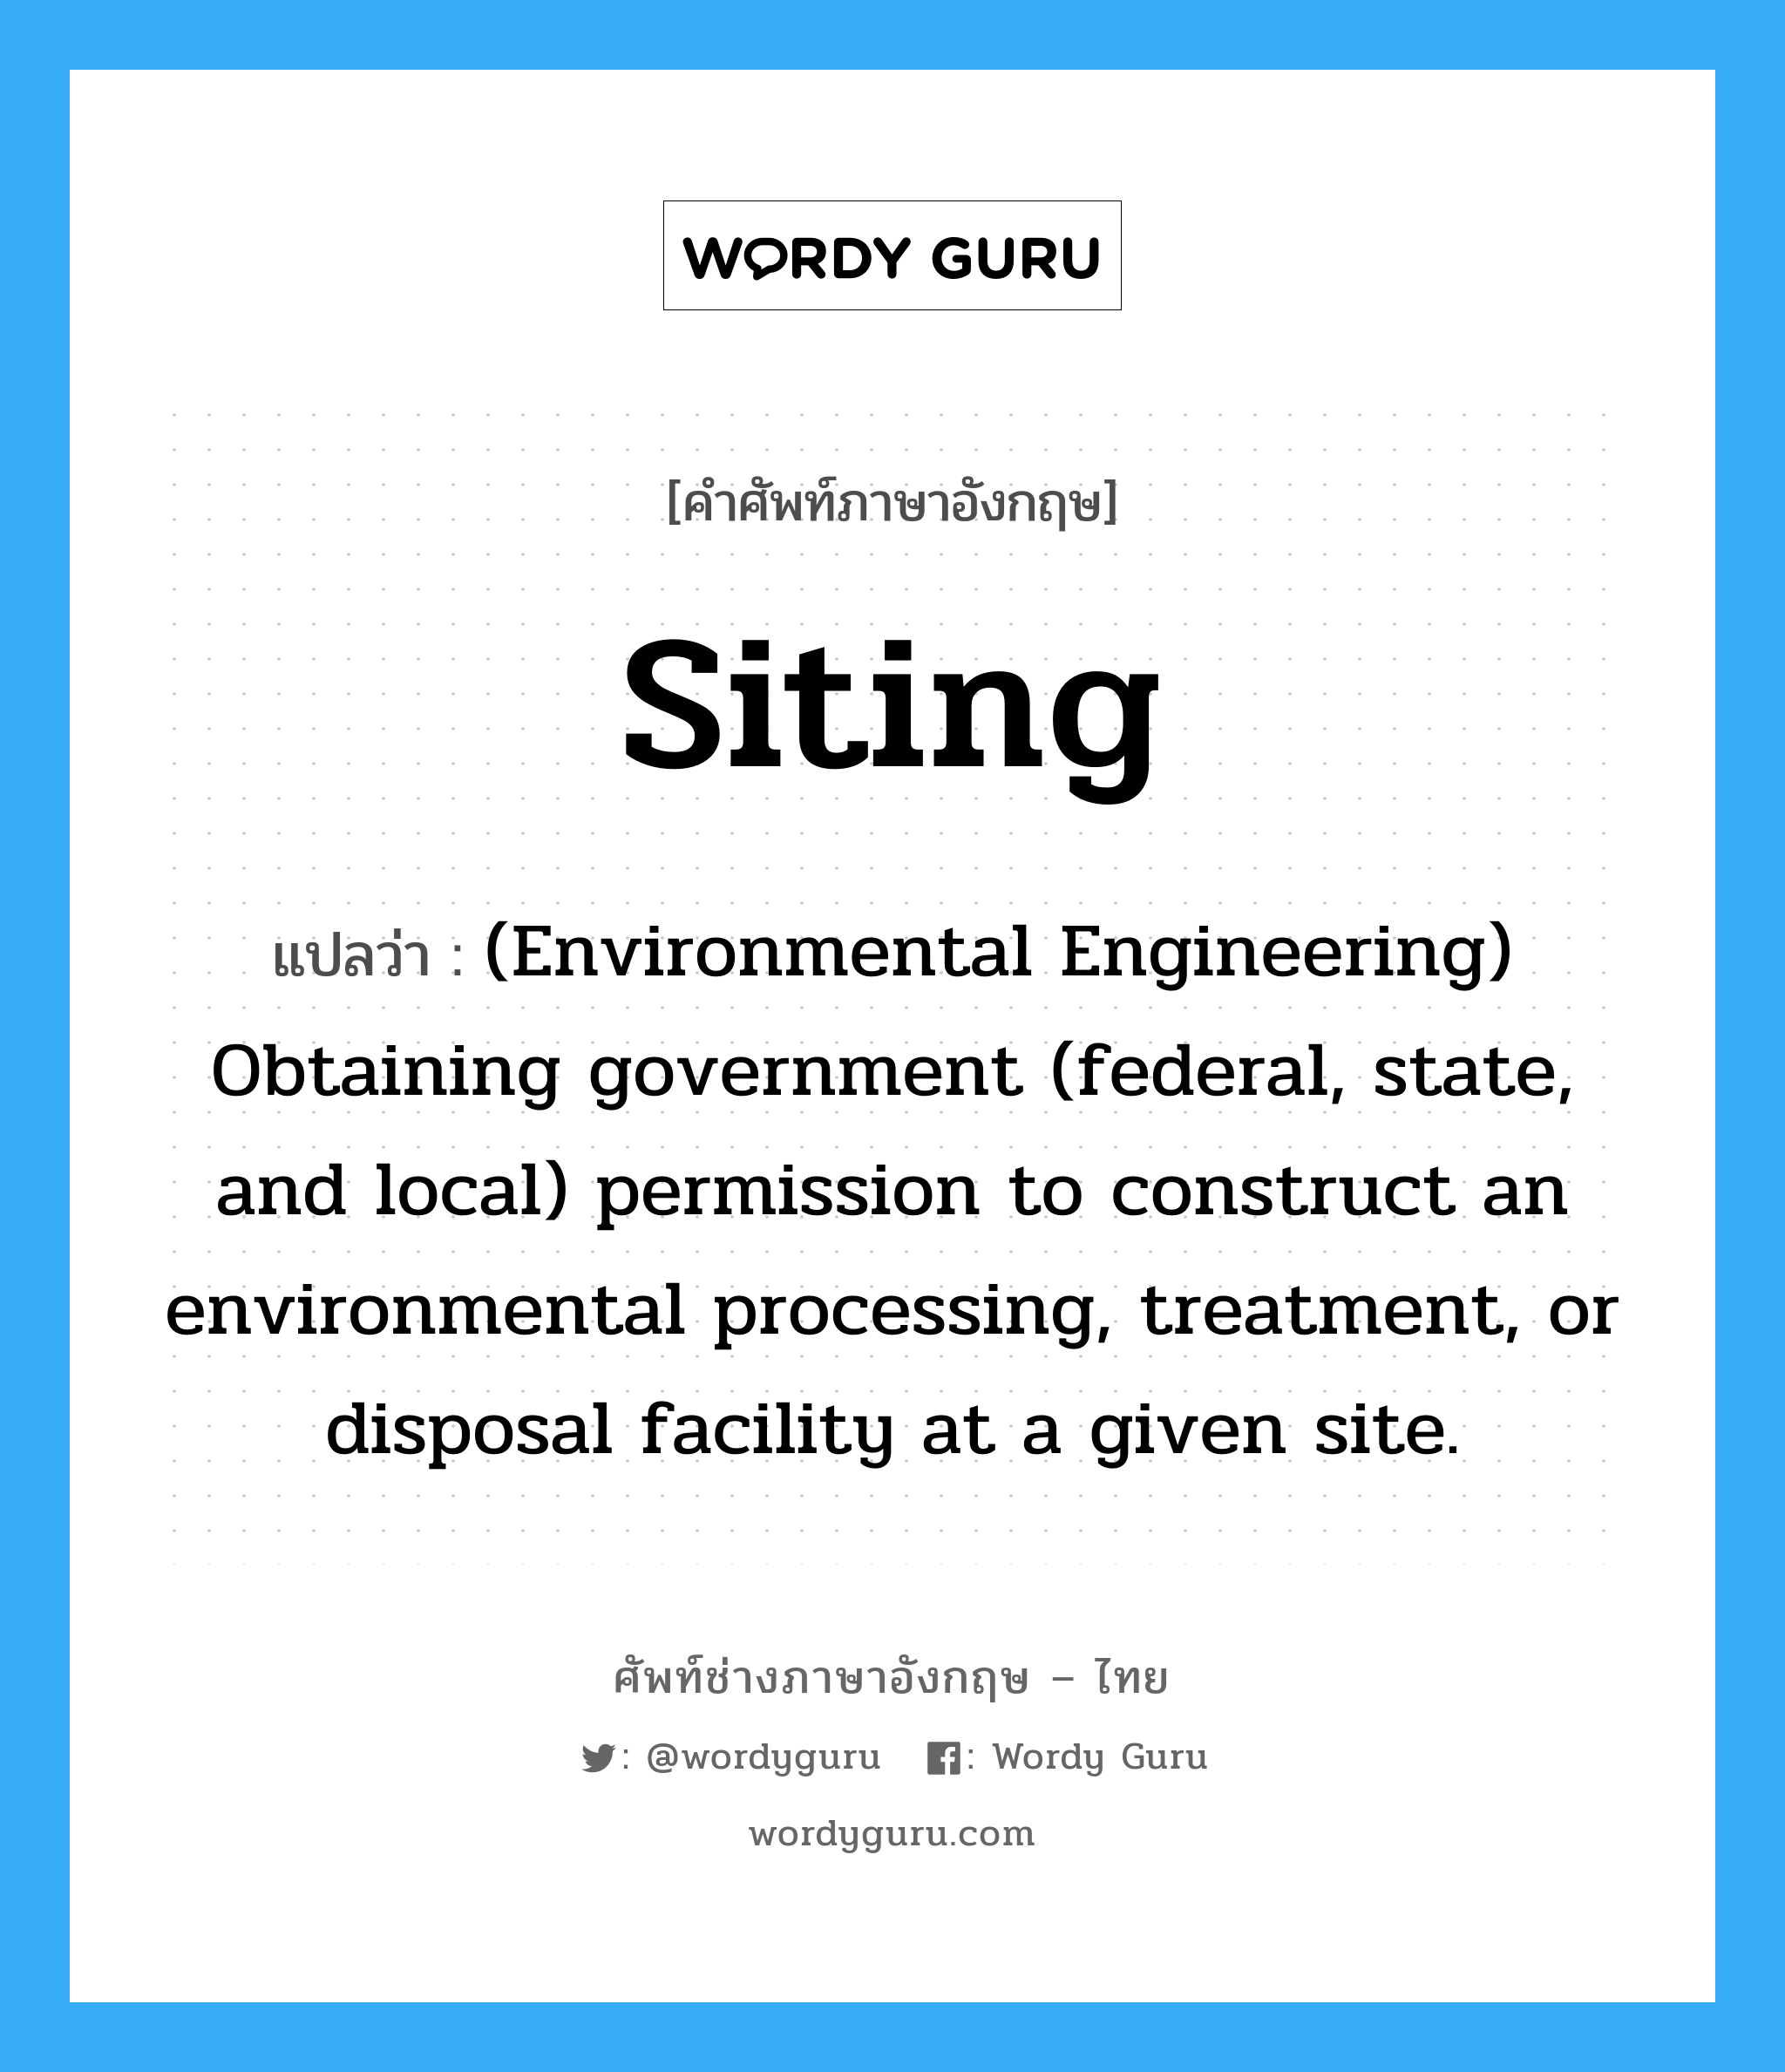 (Environmental Engineering) Obtaining government (federal, state, and local) permission to construct an environmental processing, treatment, or disposal facility at a given site. ภาษาอังกฤษ?, คำศัพท์ช่างภาษาอังกฤษ - ไทย (Environmental Engineering) Obtaining government (federal, state, and local) permission to construct an environmental processing, treatment, or disposal facility at a given site. คำศัพท์ภาษาอังกฤษ (Environmental Engineering) Obtaining government (federal, state, and local) permission to construct an environmental processing, treatment, or disposal facility at a given site. แปลว่า Siting